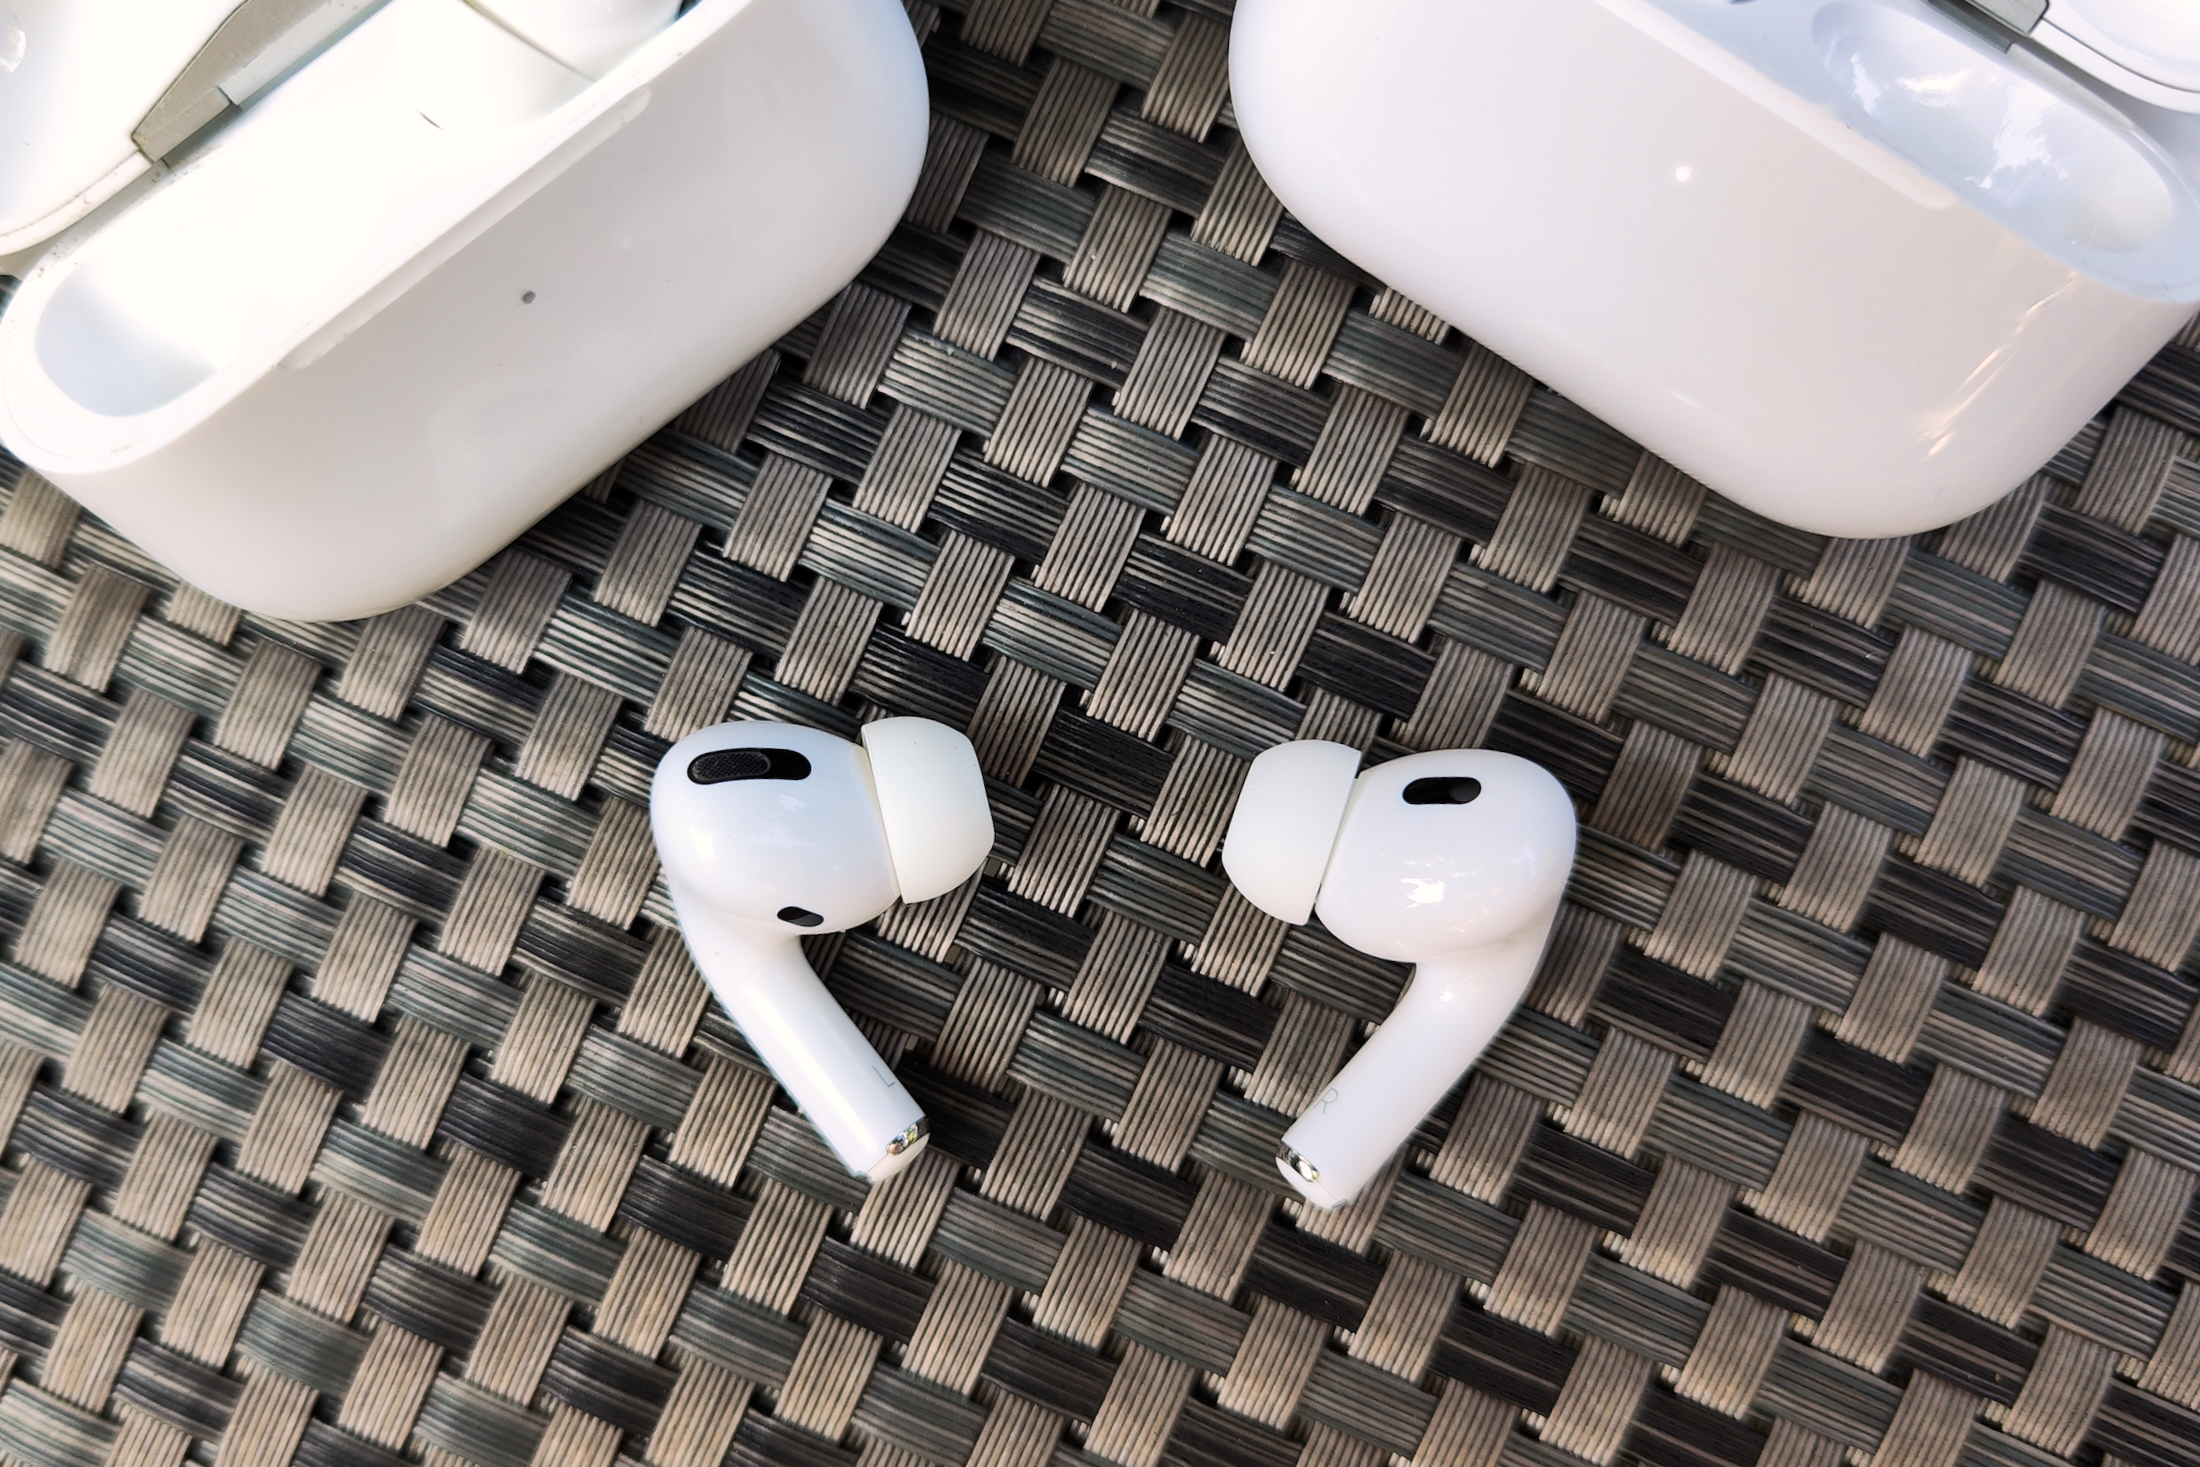 Apple AirPods Pro vs. AirPods Pro: What's new? | Digital Trends